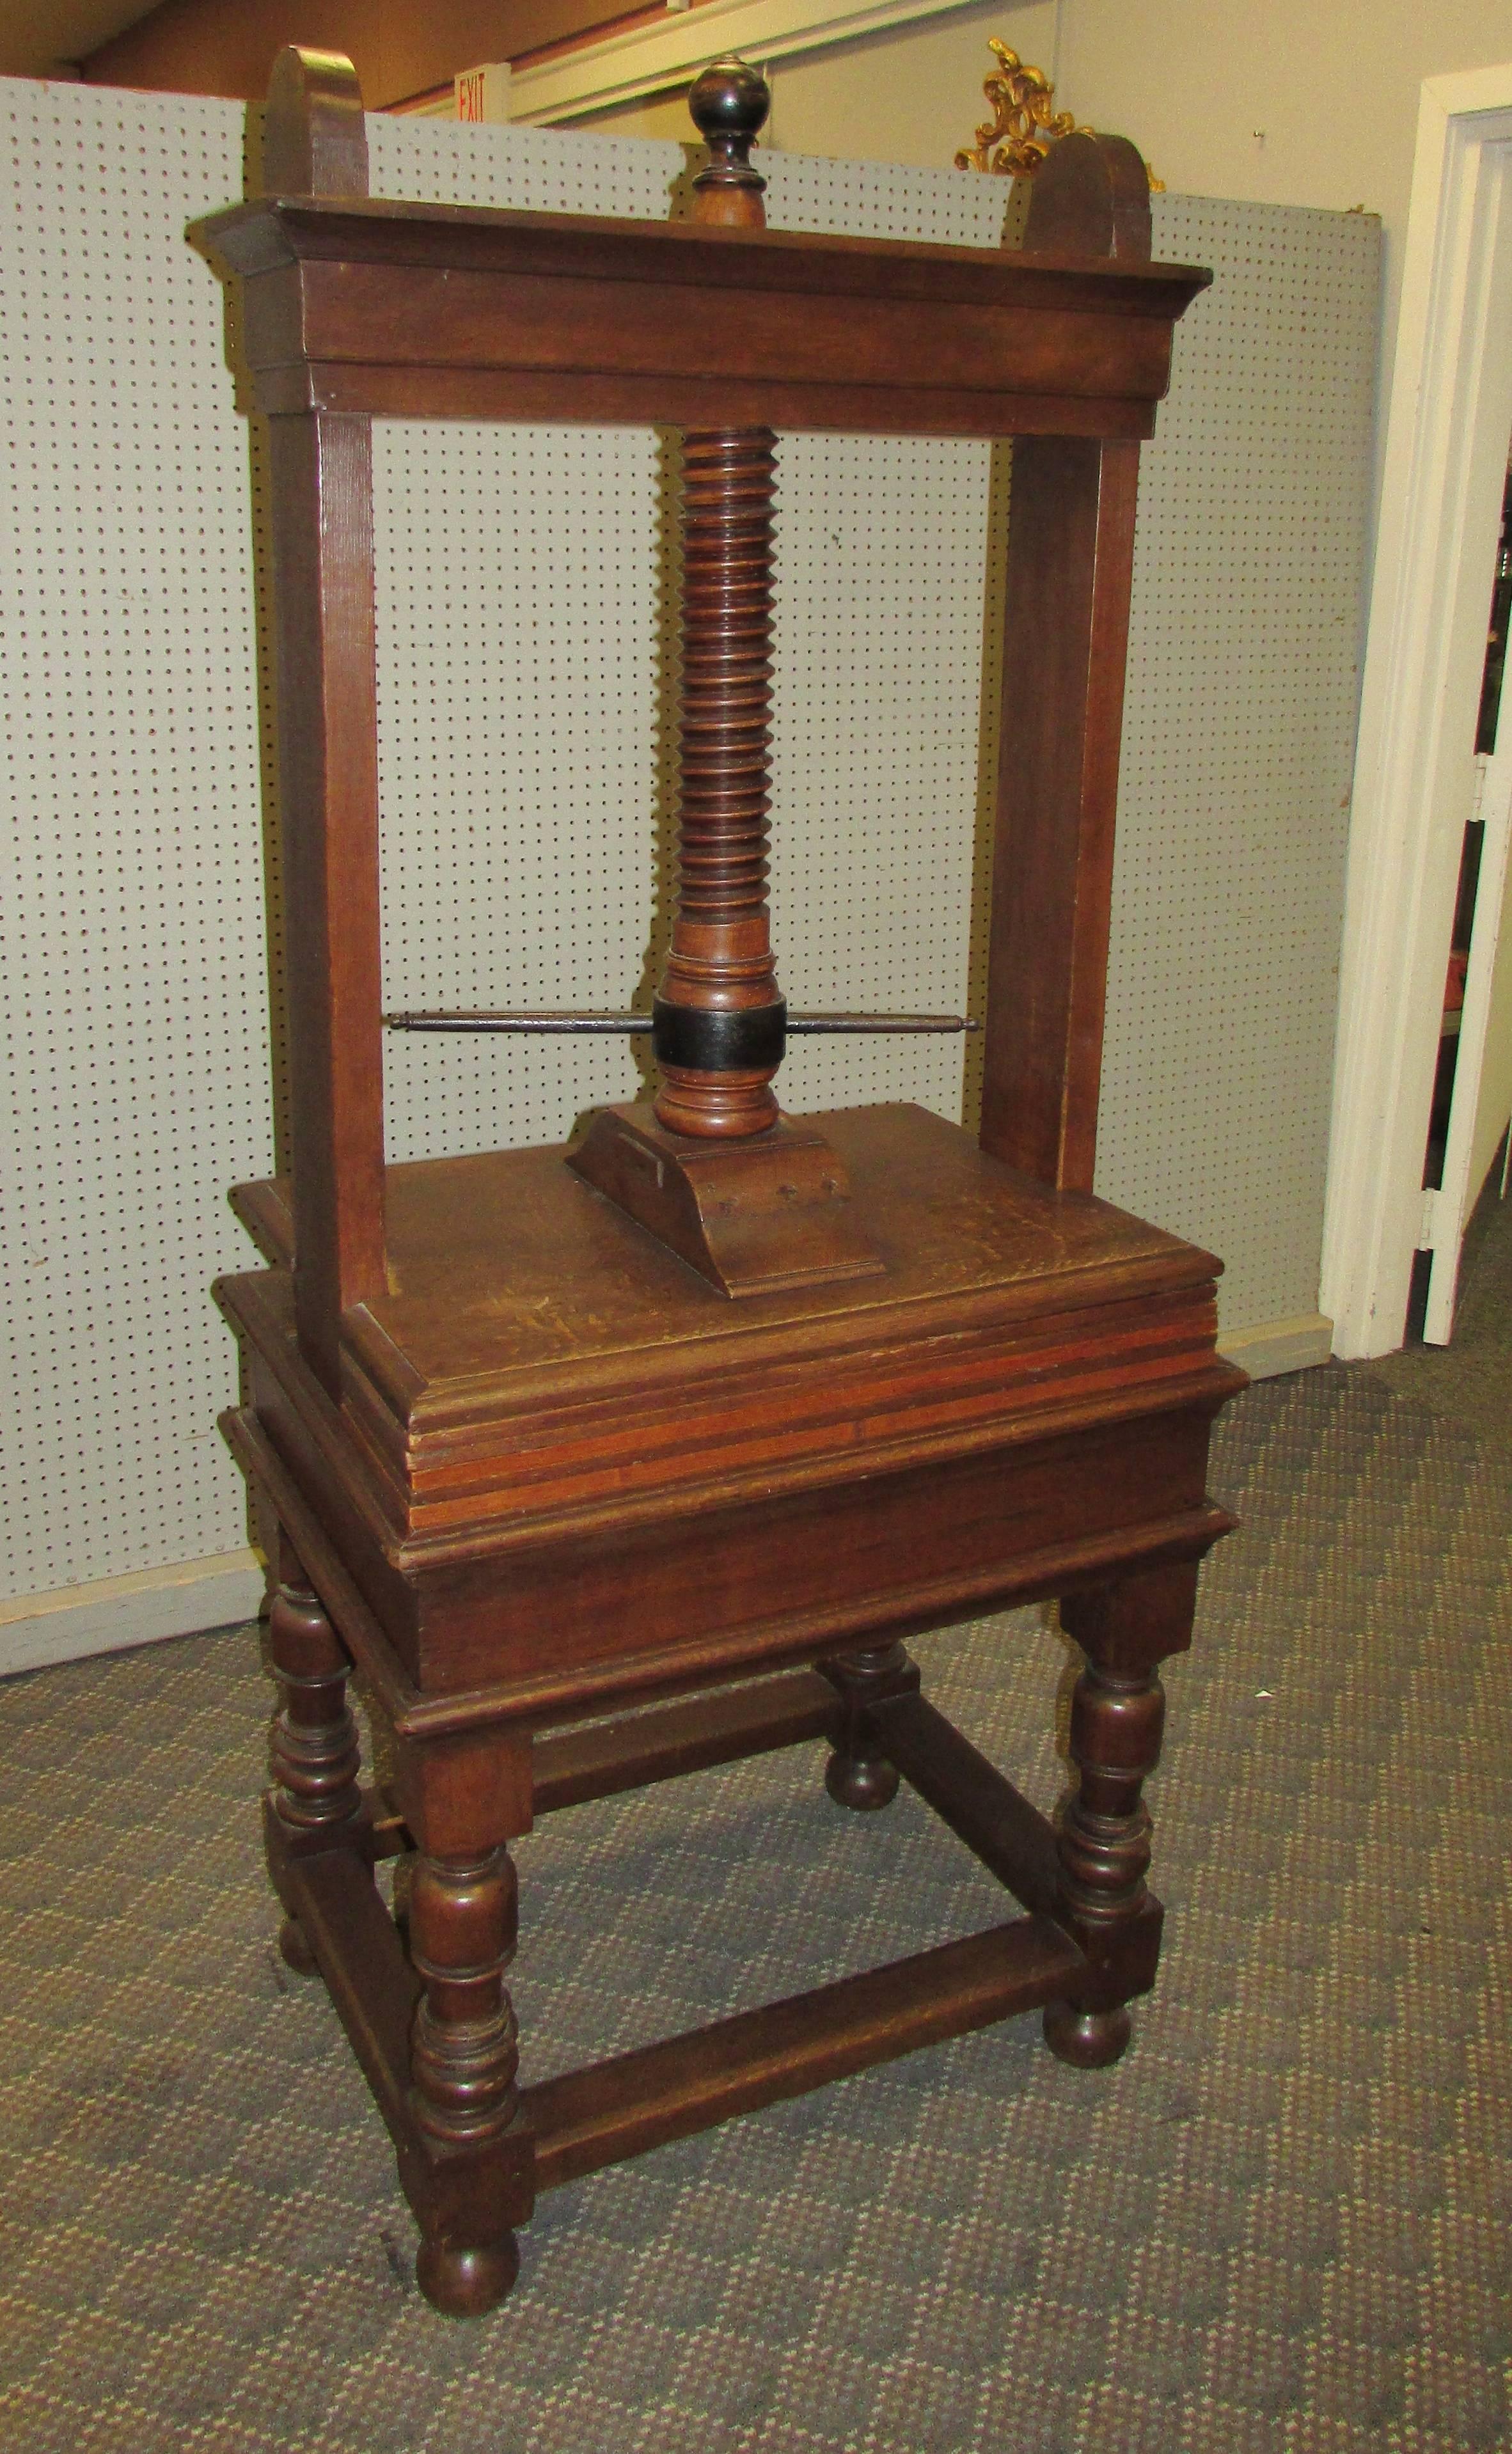 Impressive and large antique American working book press from the last quarter of the 19th century. Made of oak and iron.